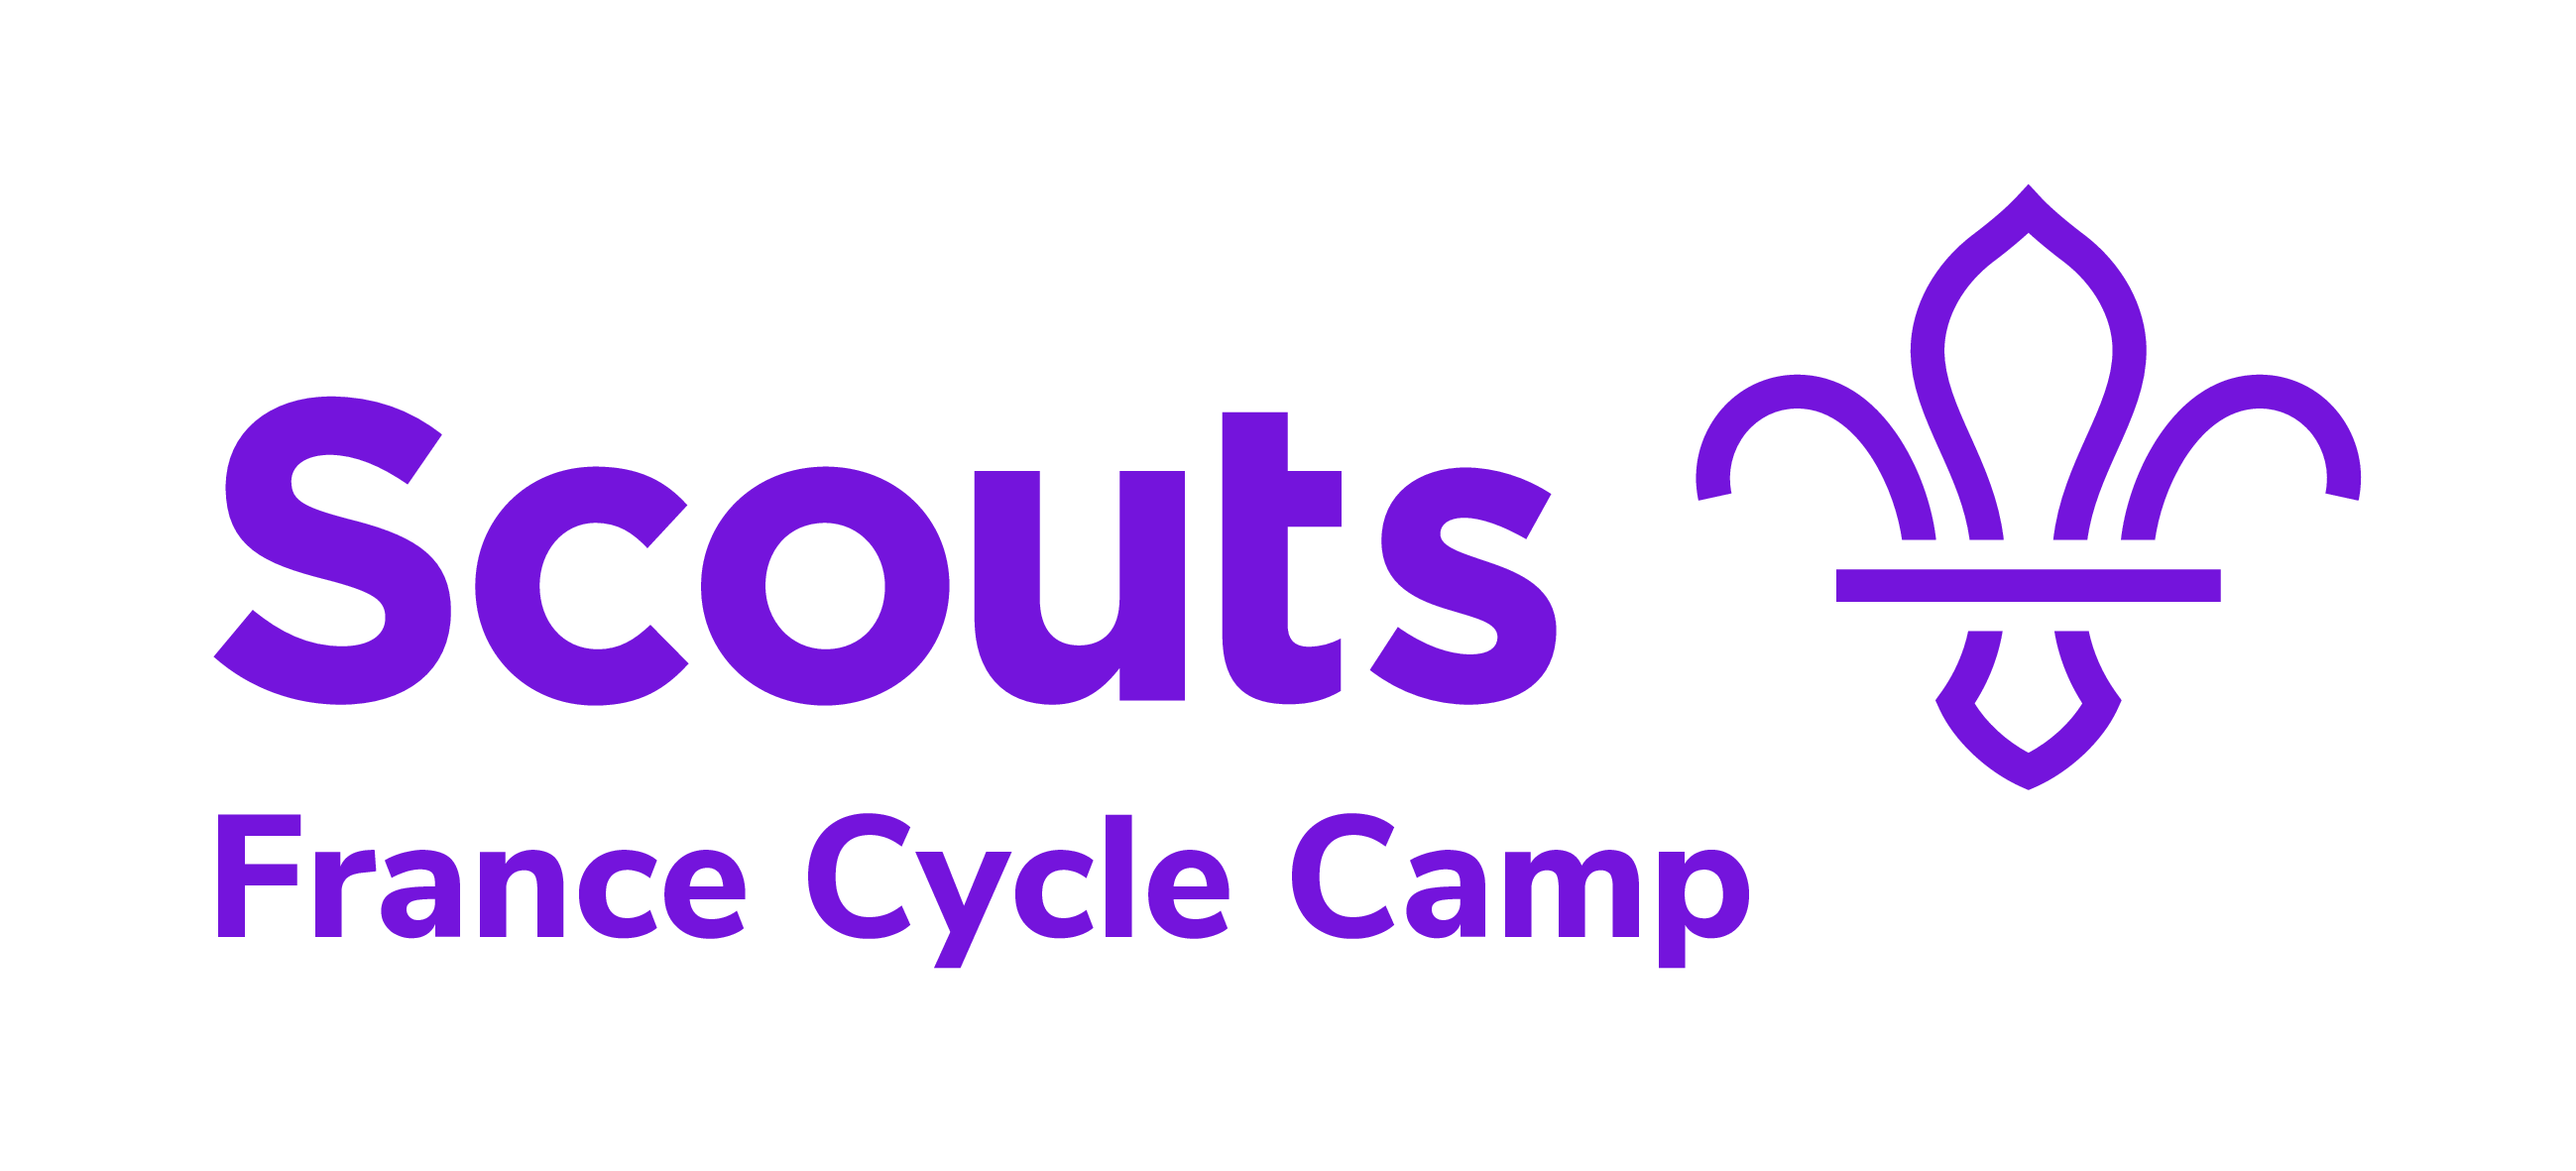 France Cycle Camp